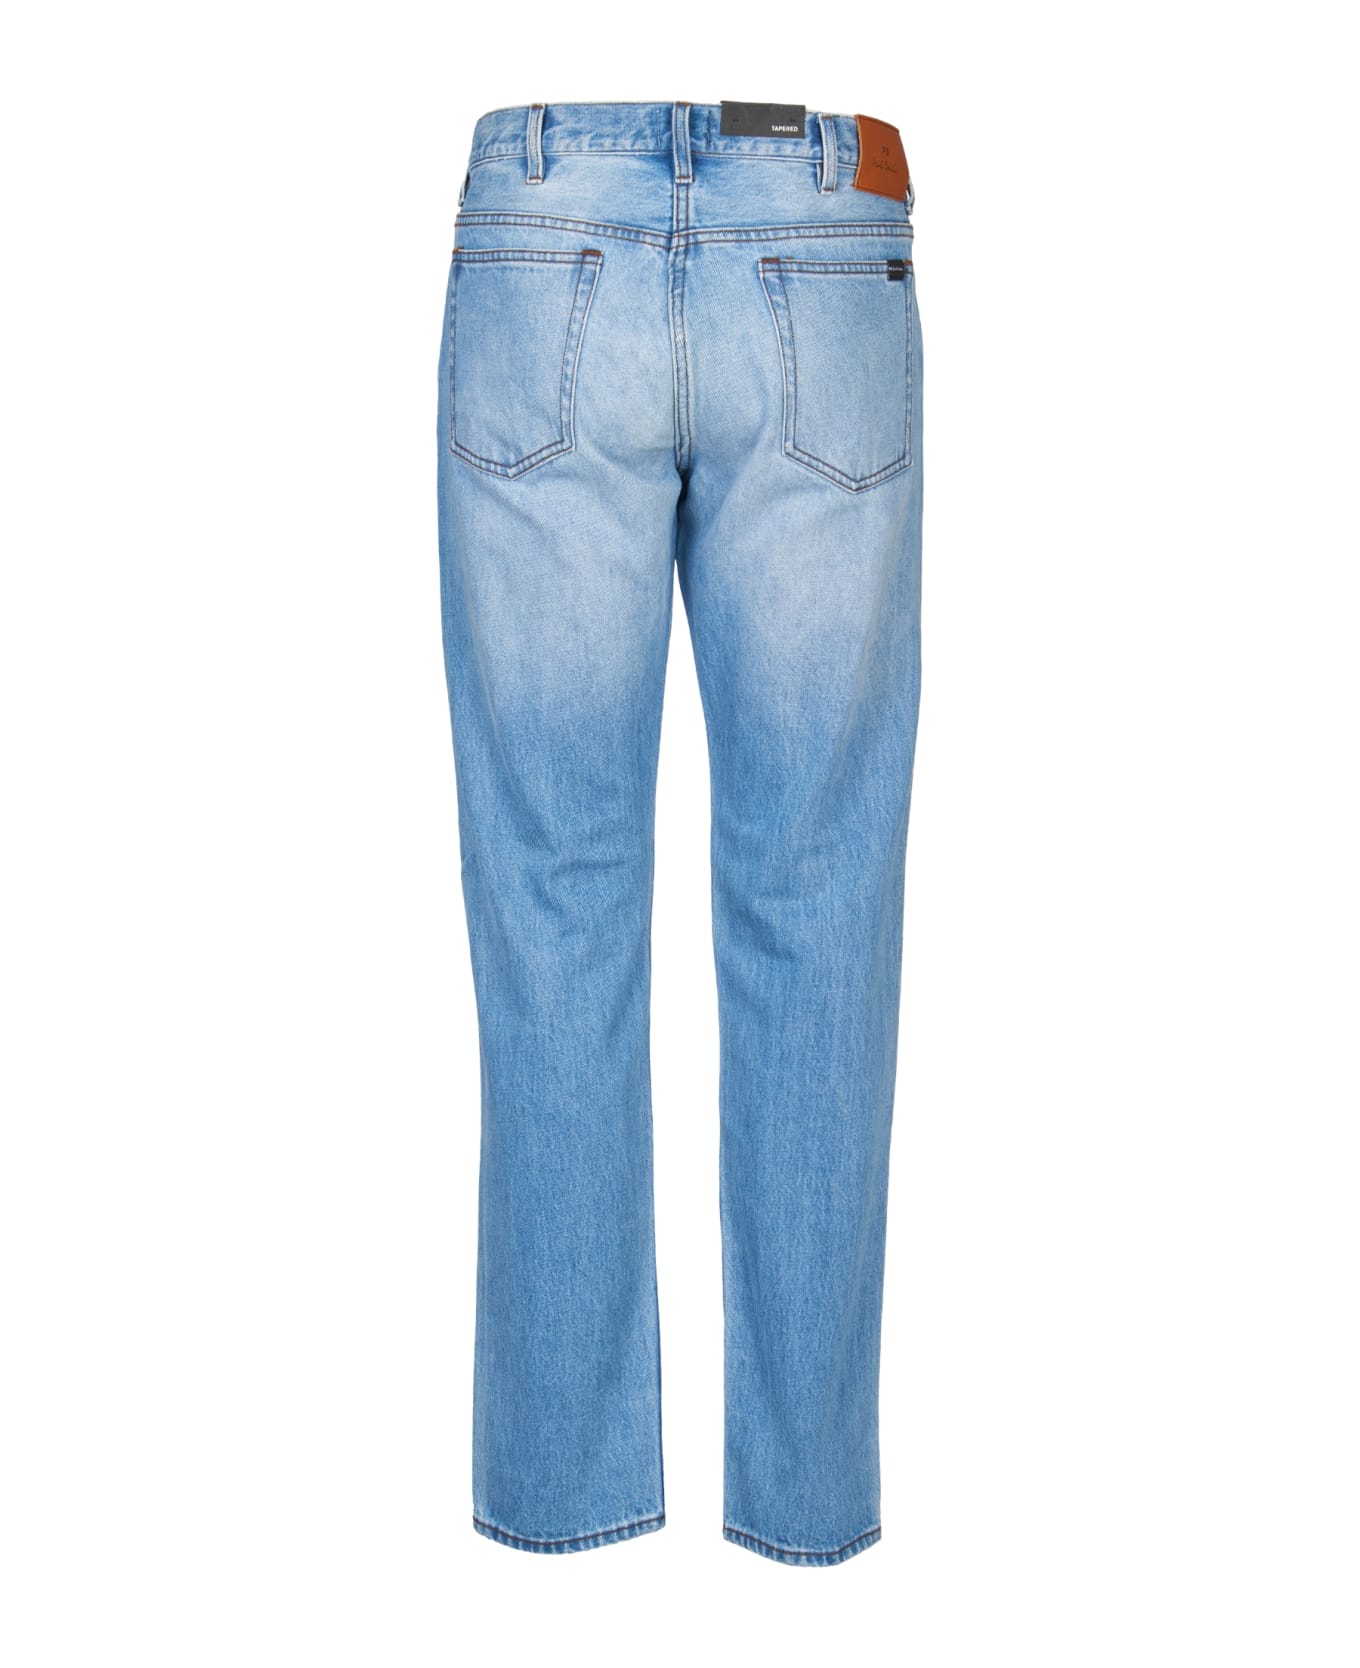 Paul Smith Jeans - Blue ボトムス